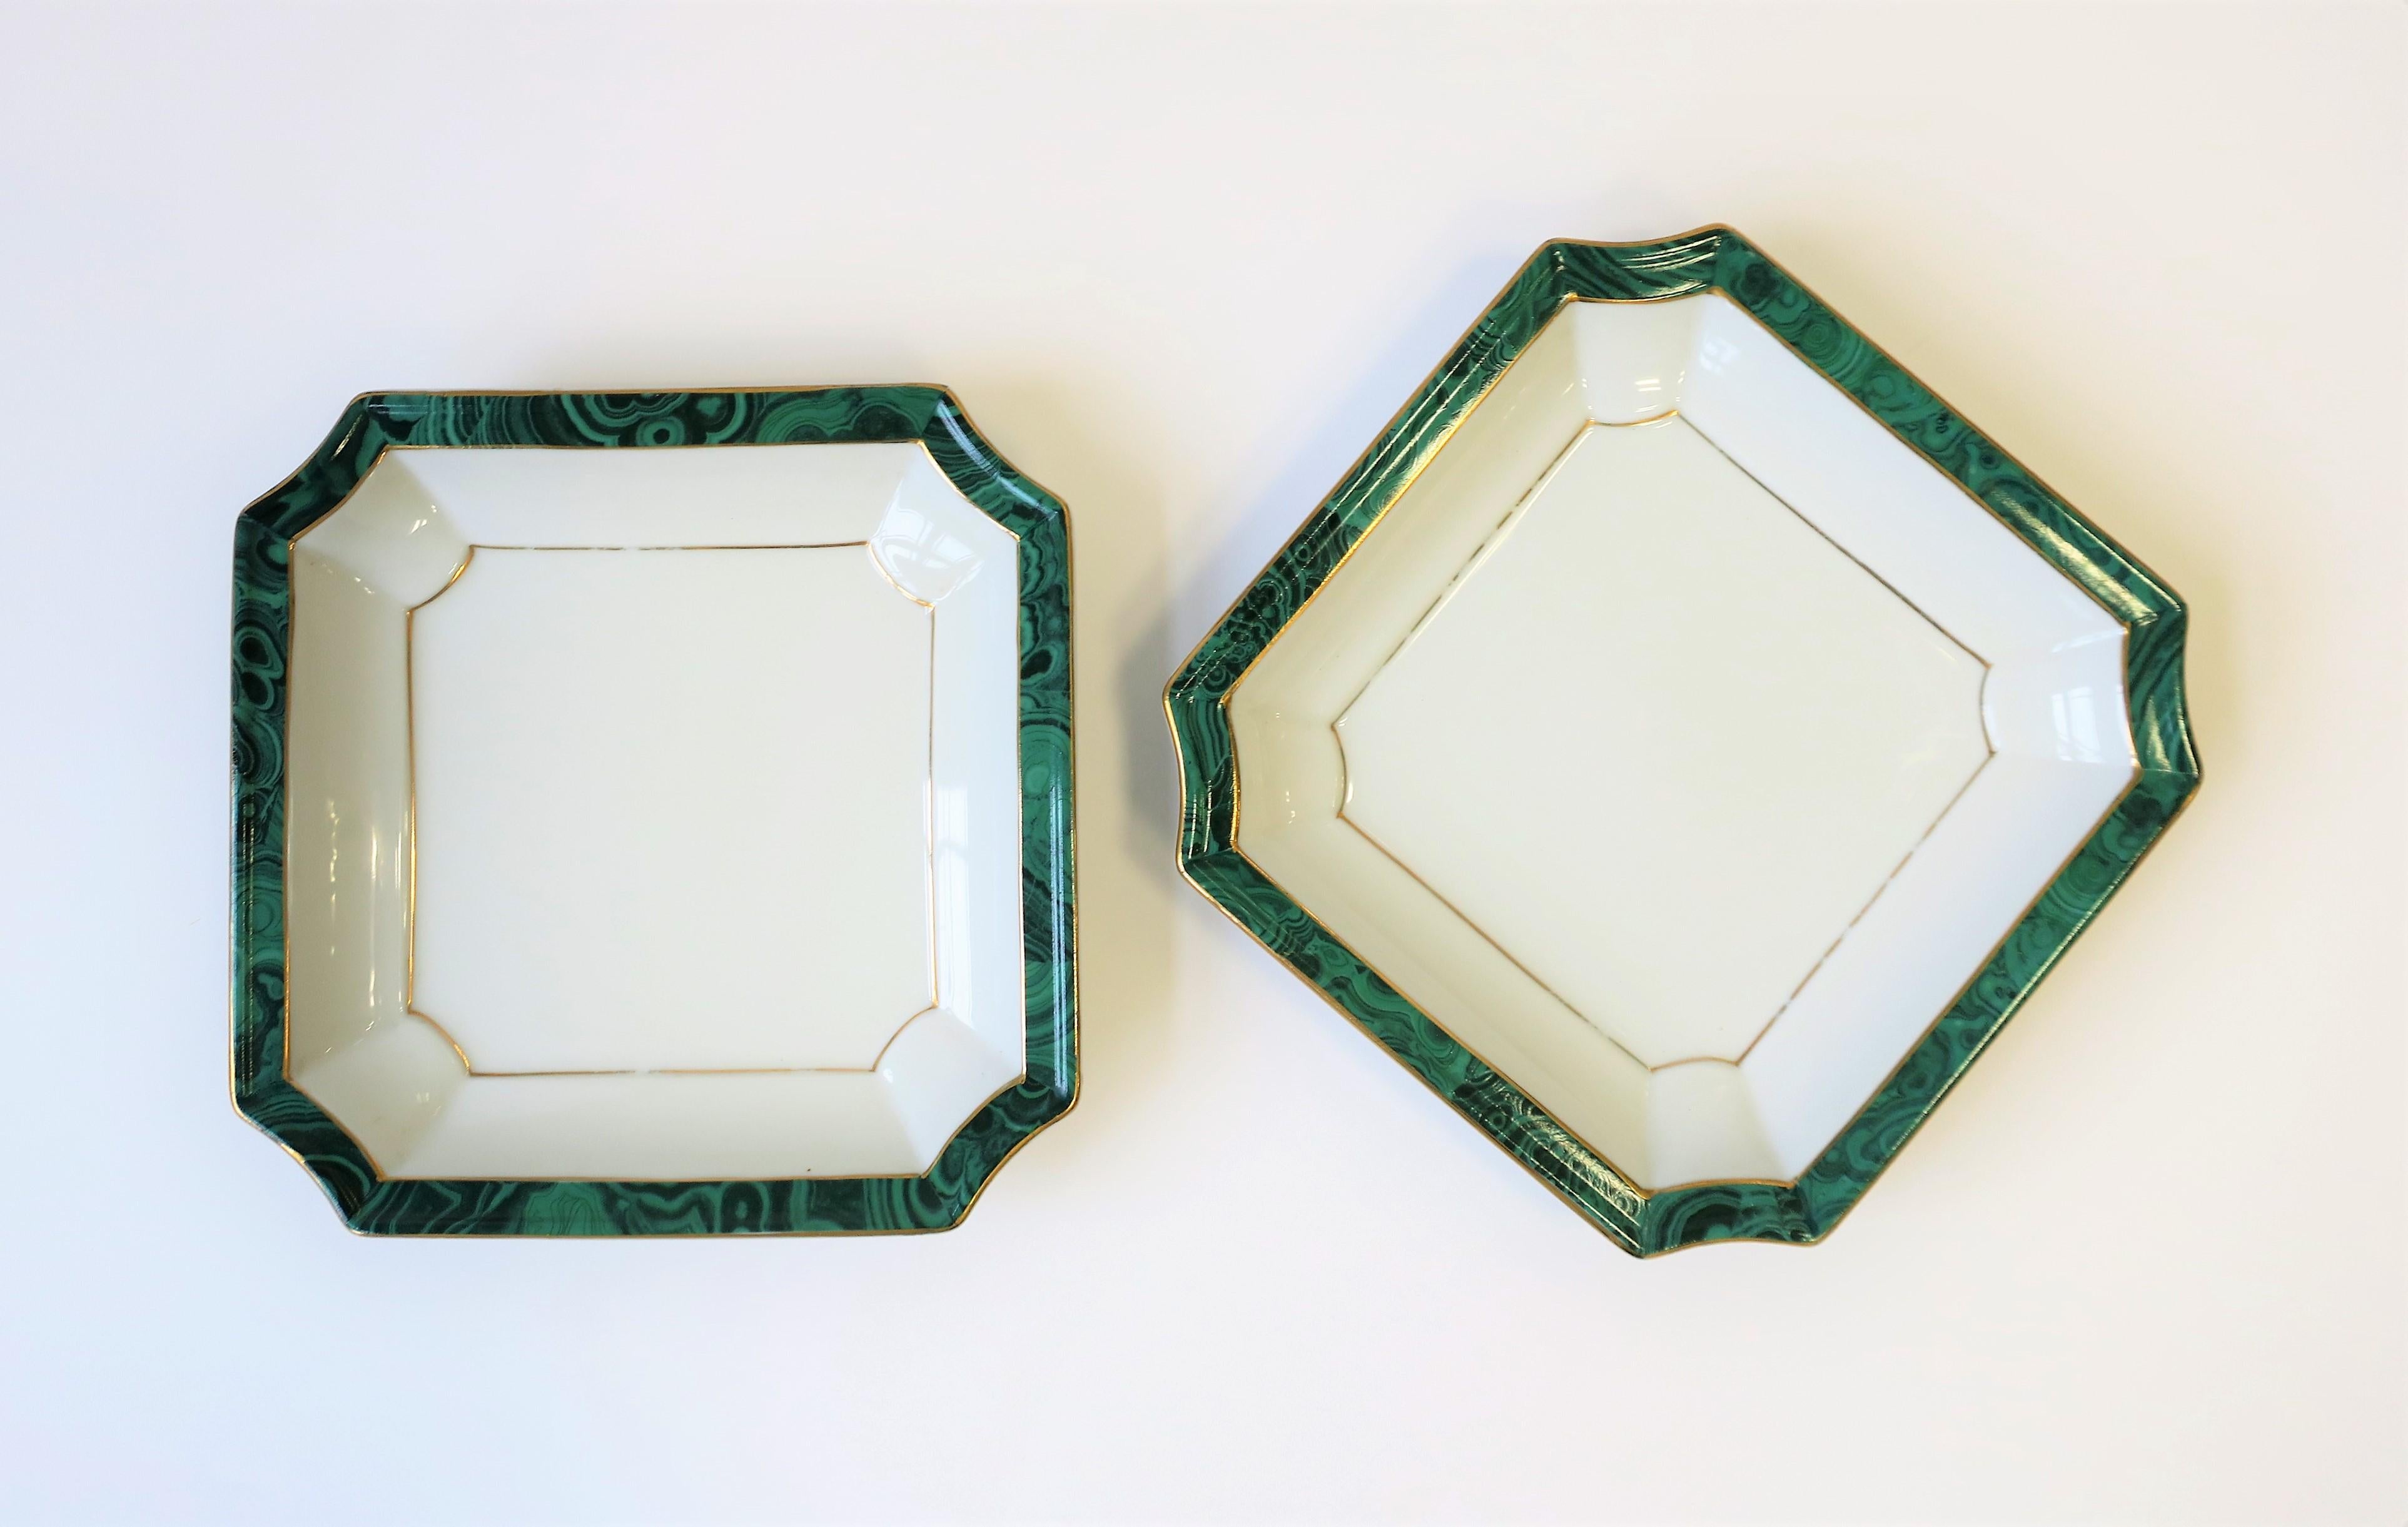 Hollywood Regency Green Malachite and Gold Entertaining Serving Bowls, ca. 1980s, Pair